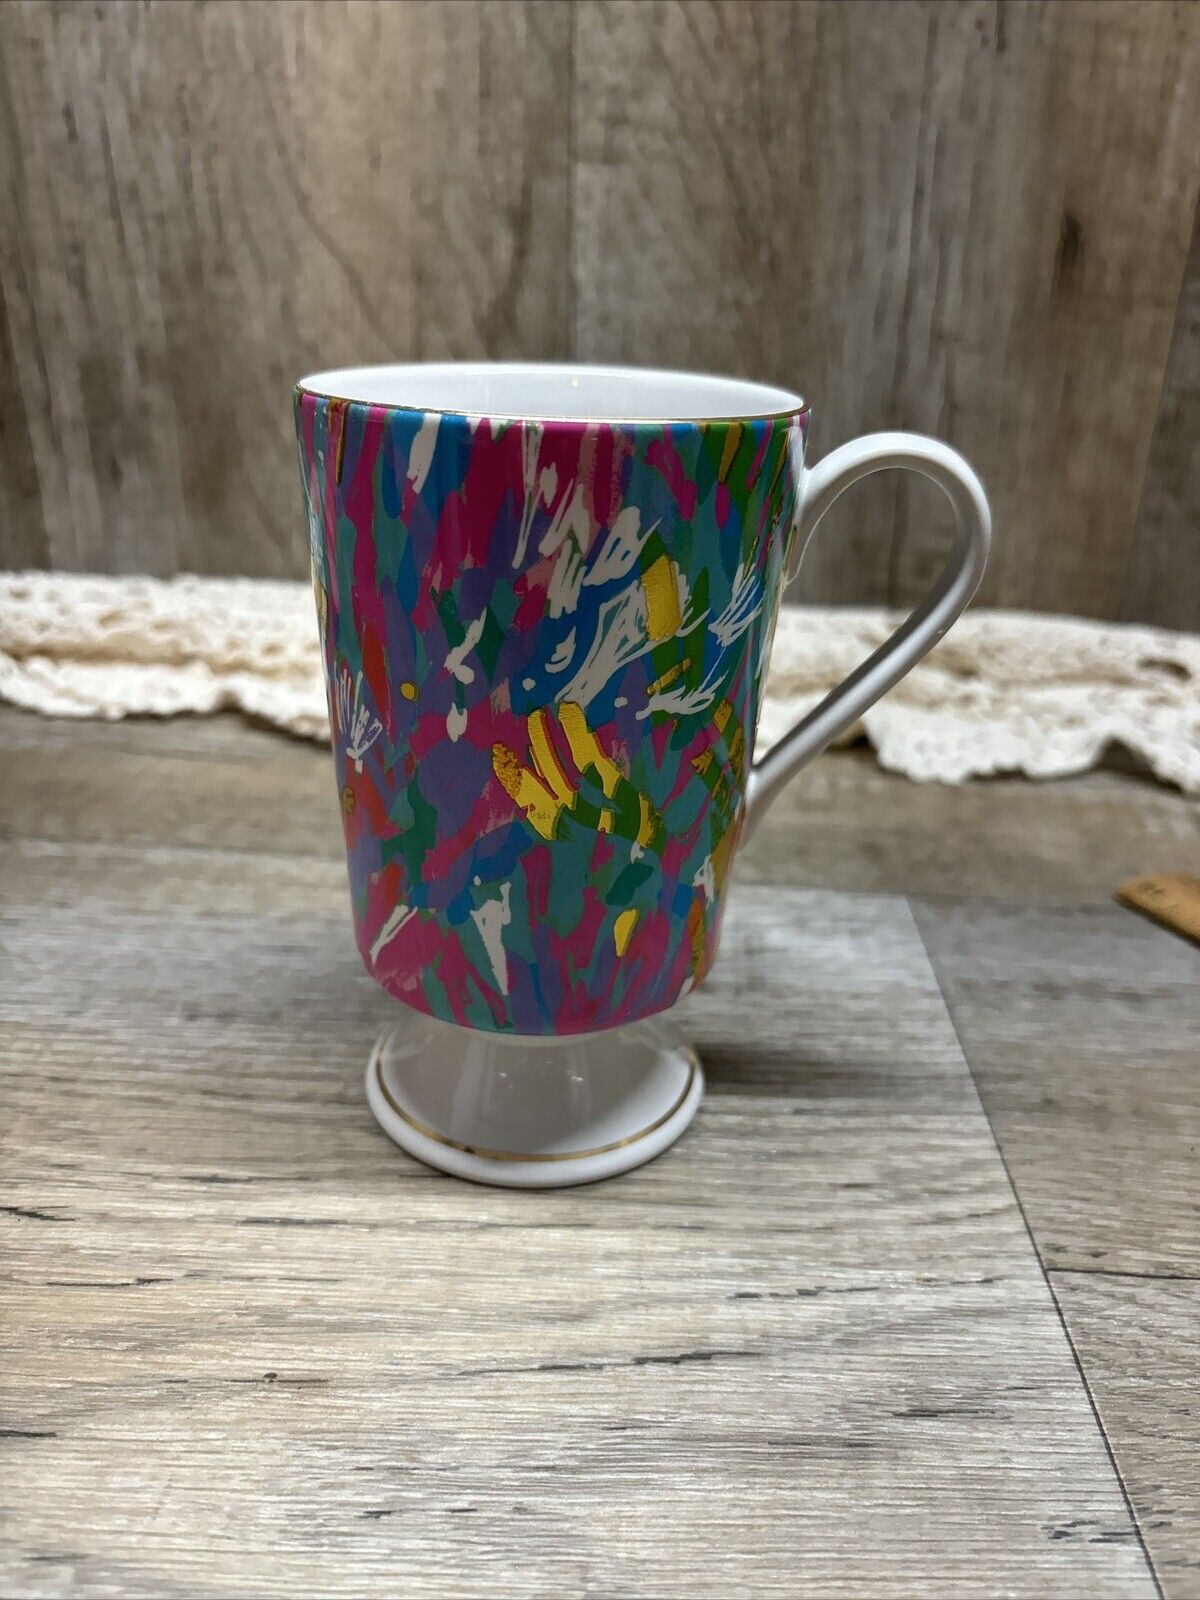 Lilly Pulitzer Footed Mug Neon Gold Trim Sparkle Abstract Coffee Tea